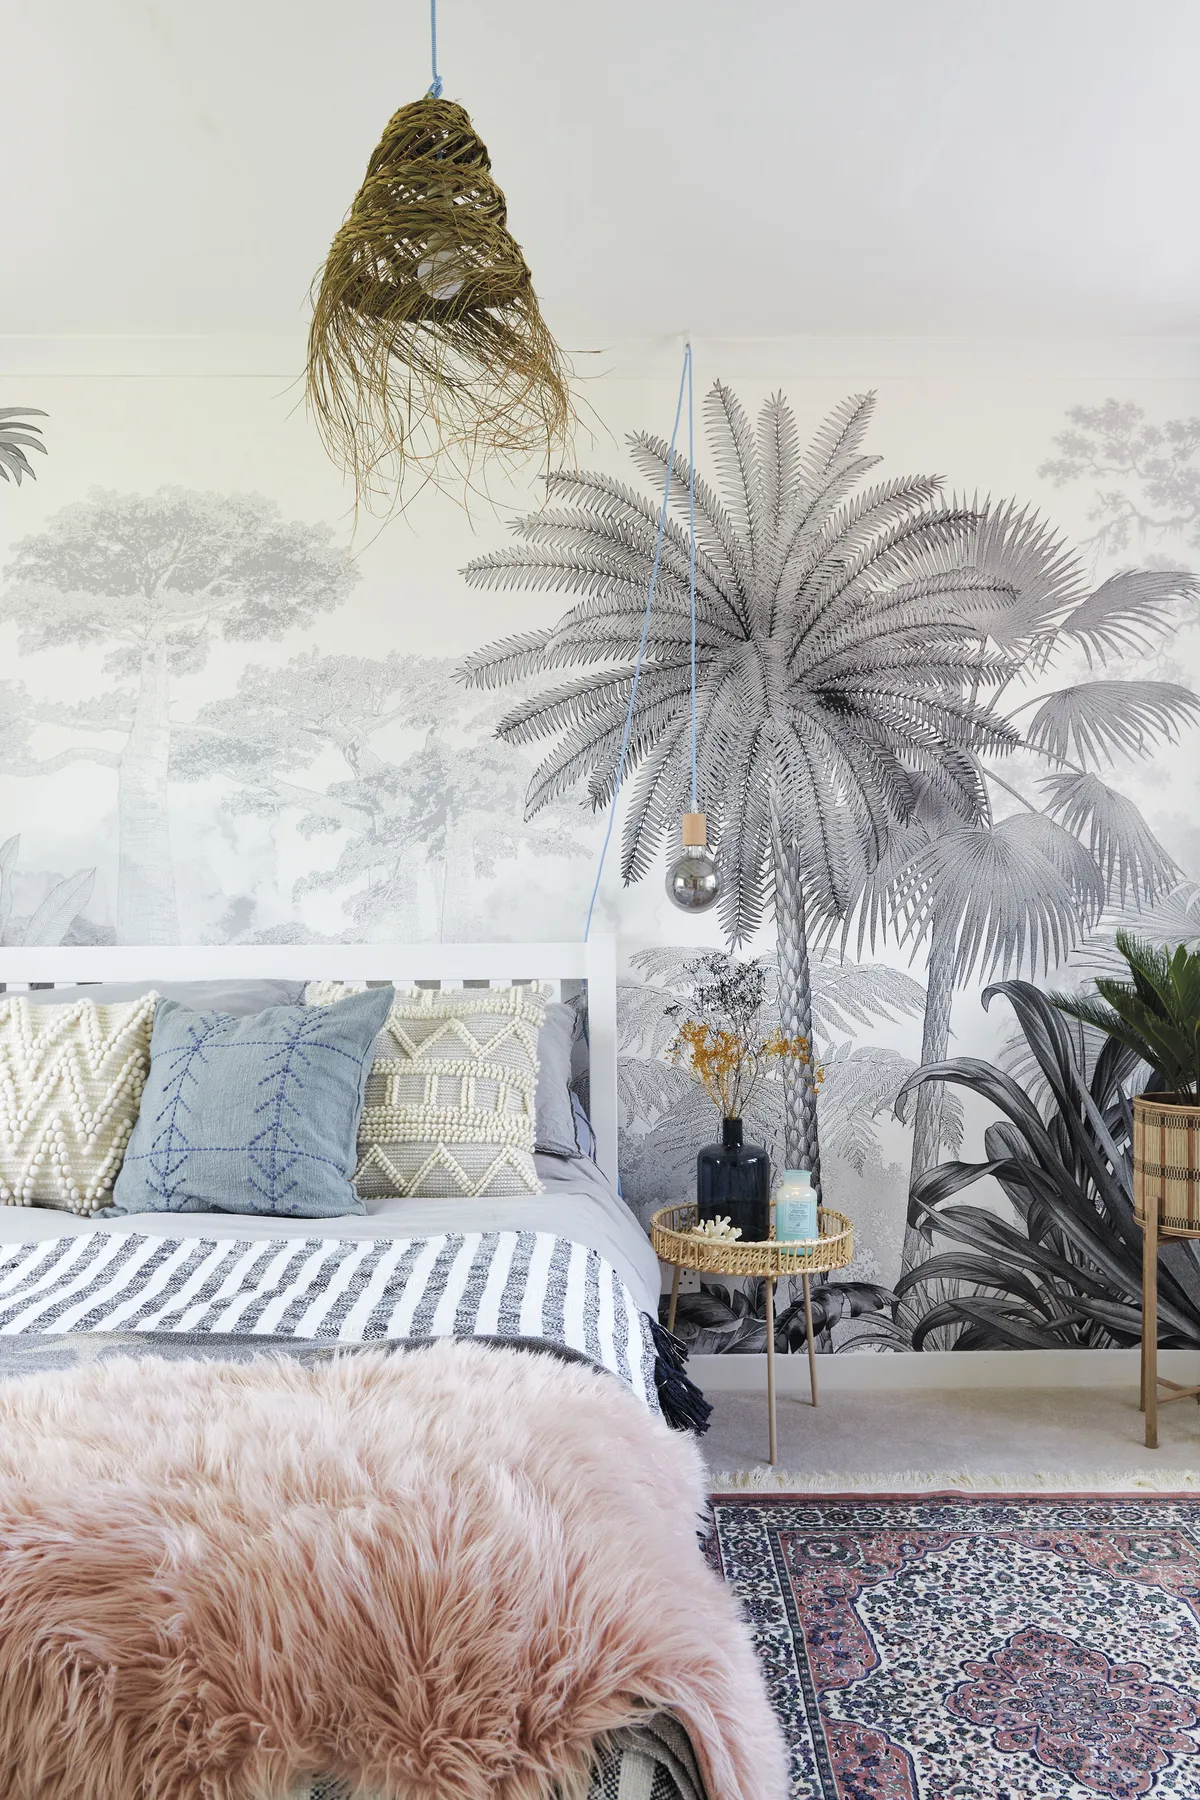 Ellie chose this striking wallpaper mural from Photowall to create an eye-catching focal point in this room. Textured cushions and throws add a tactile element